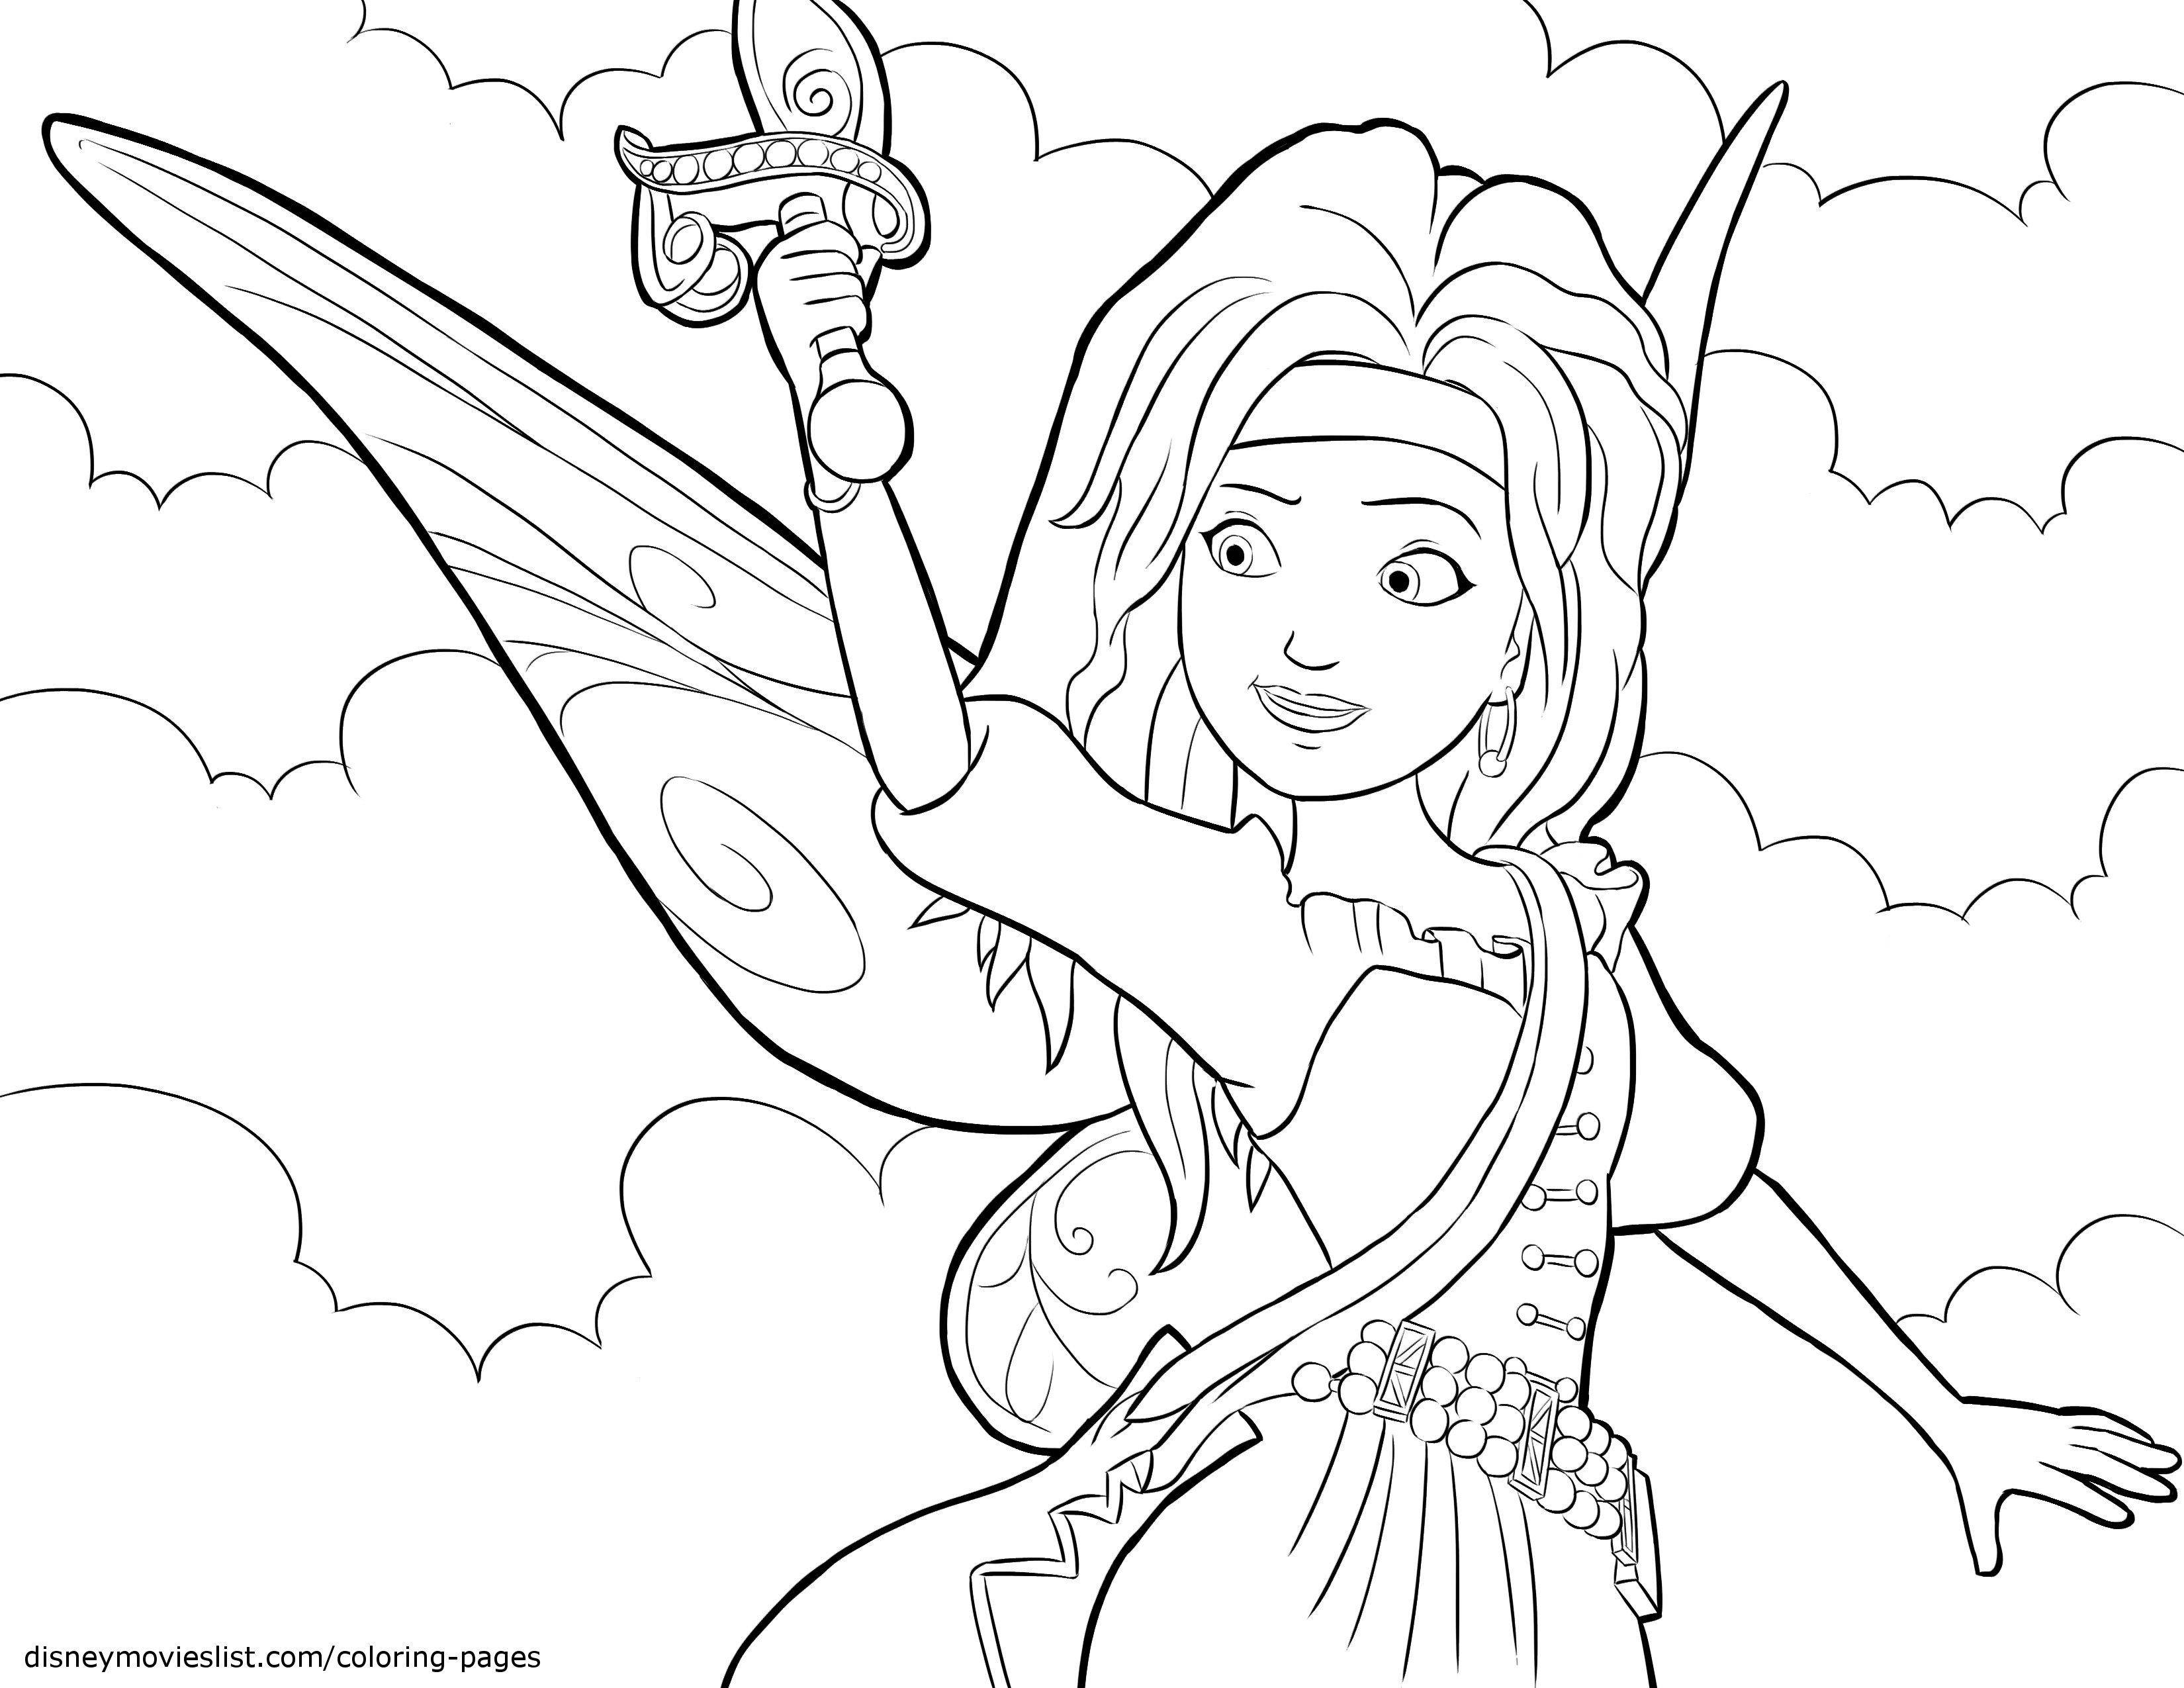 Coloring Fairy with sword. Category Fantasy. Tags:  fairy, wings, sword.